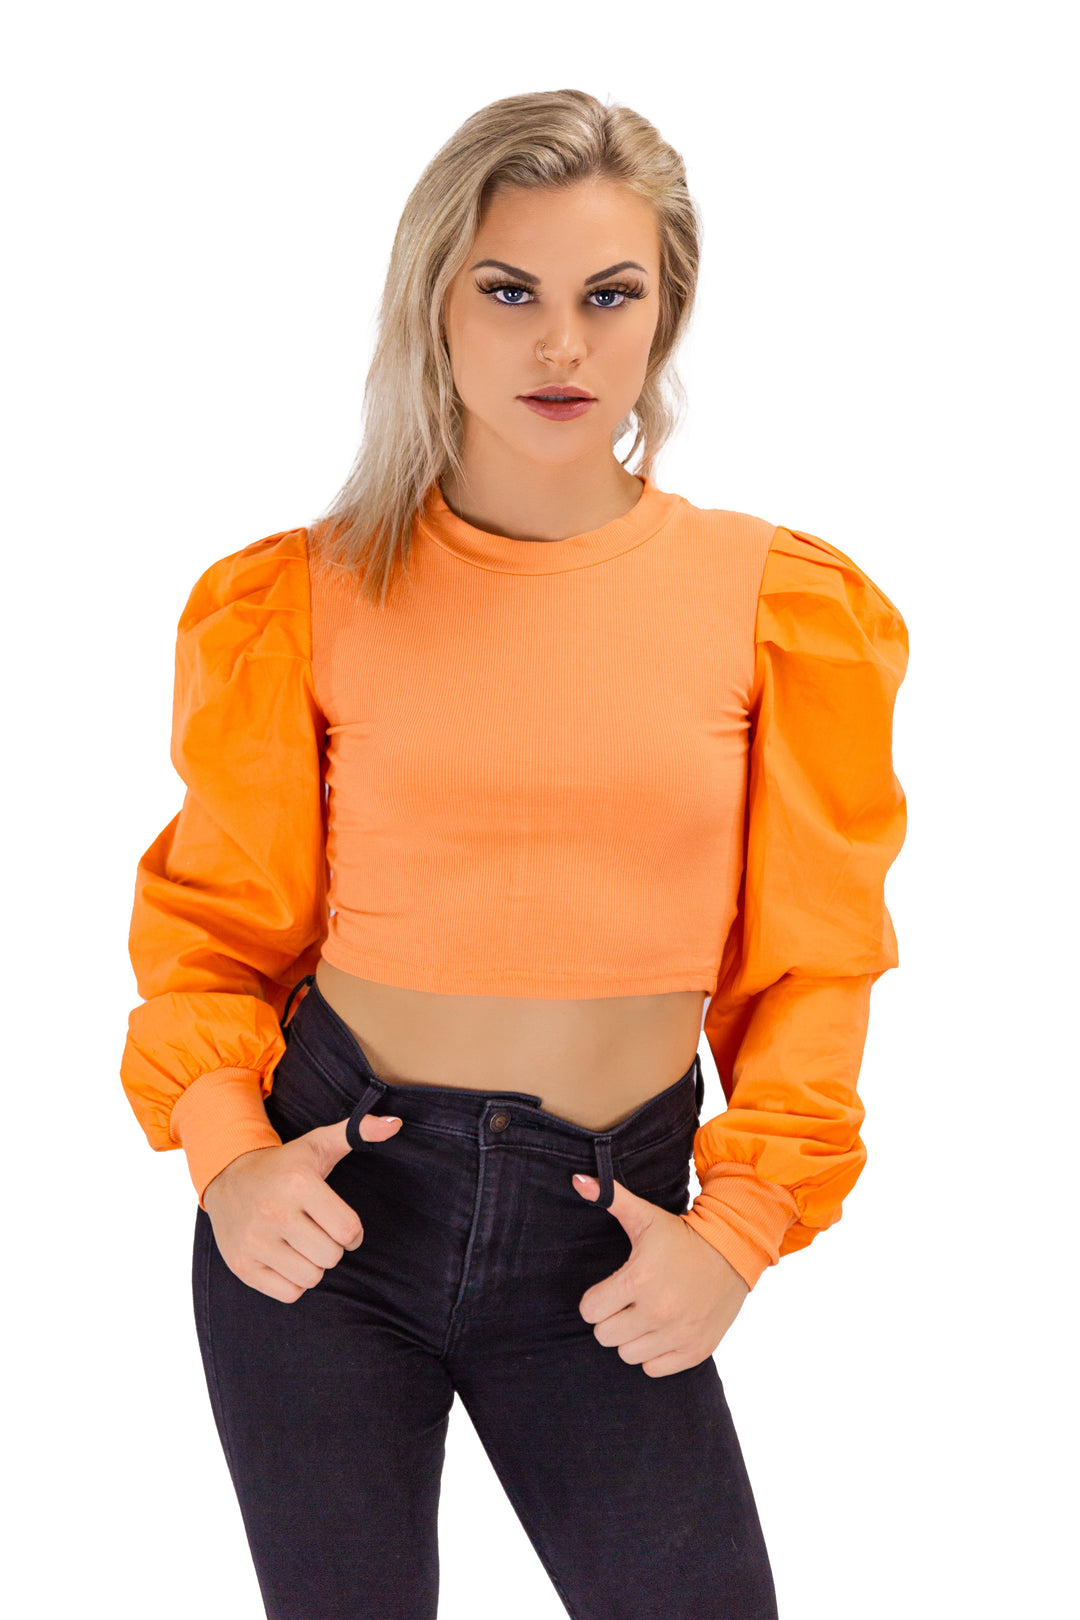 Fabonics Citrus Chic High Knit Neck Orange Blouse with Puff Sleeves for Women